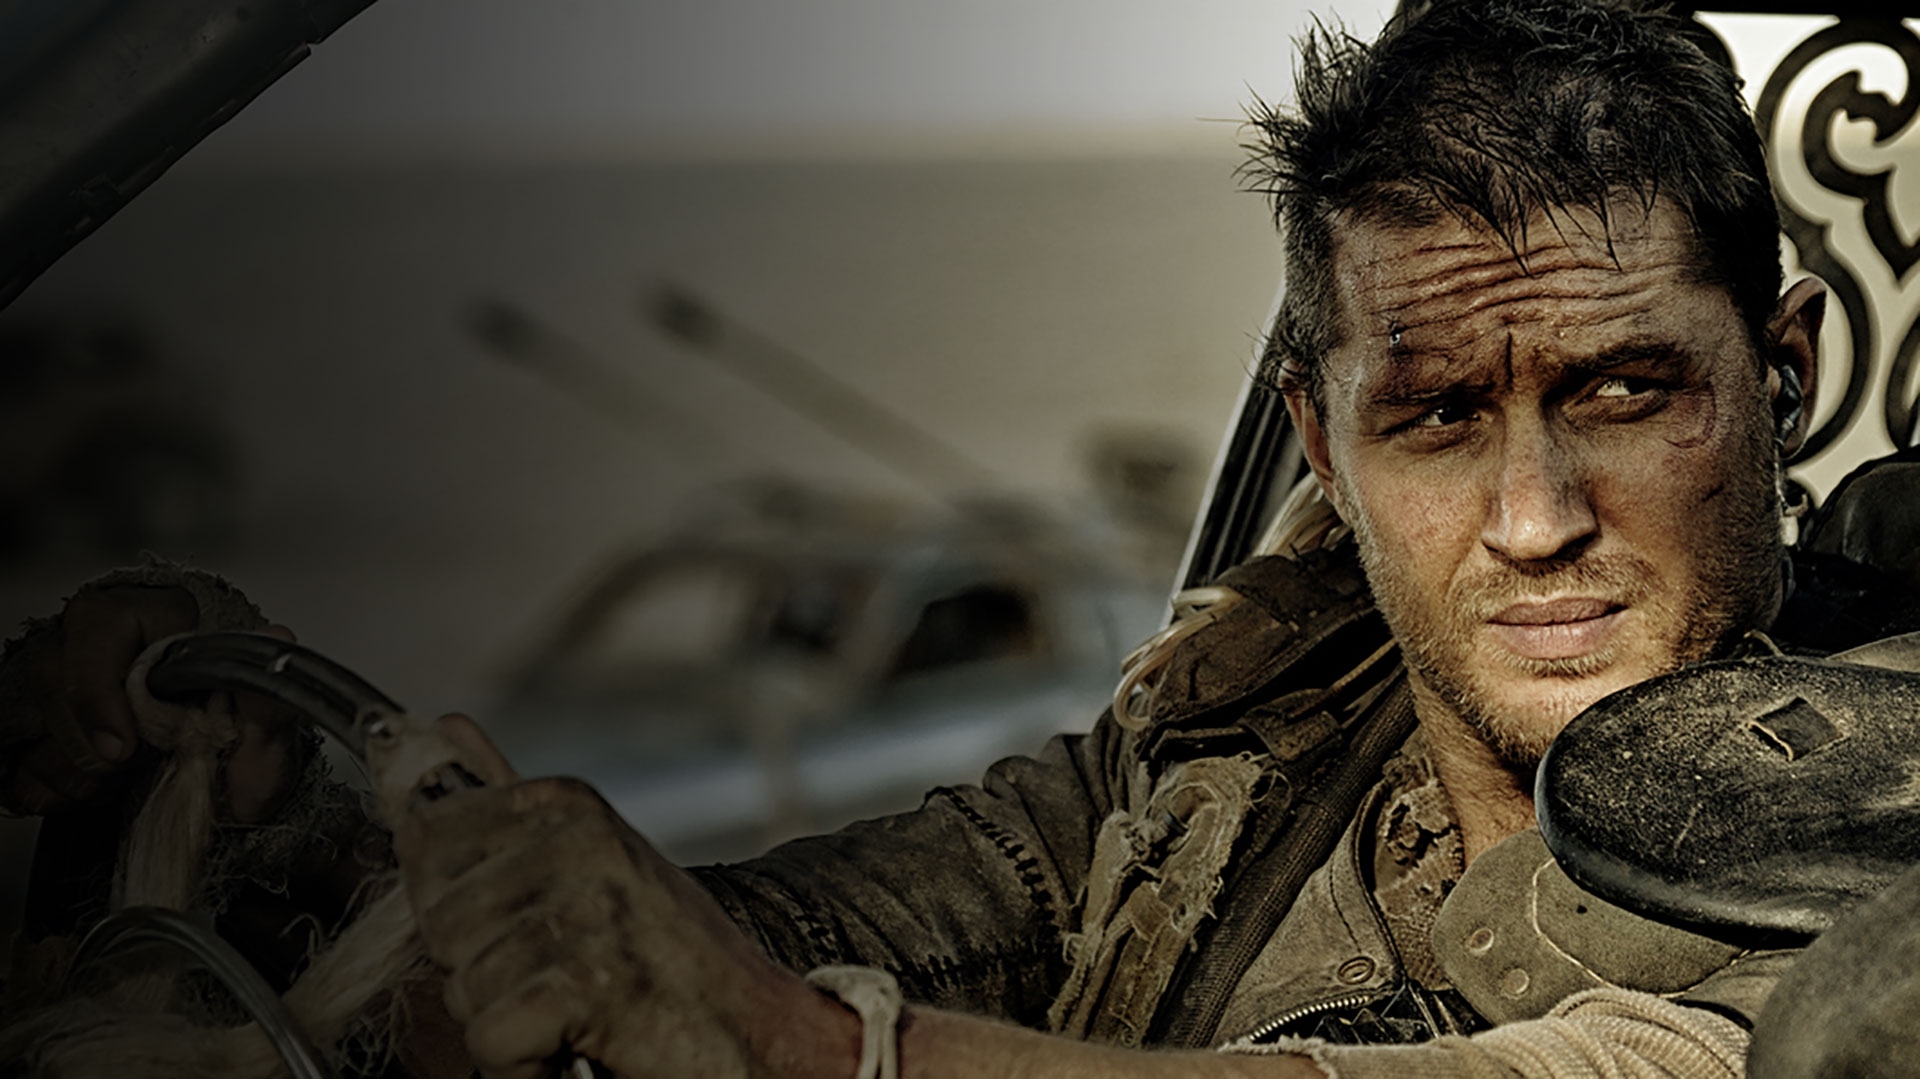 mad max fury road free online streaming 2015